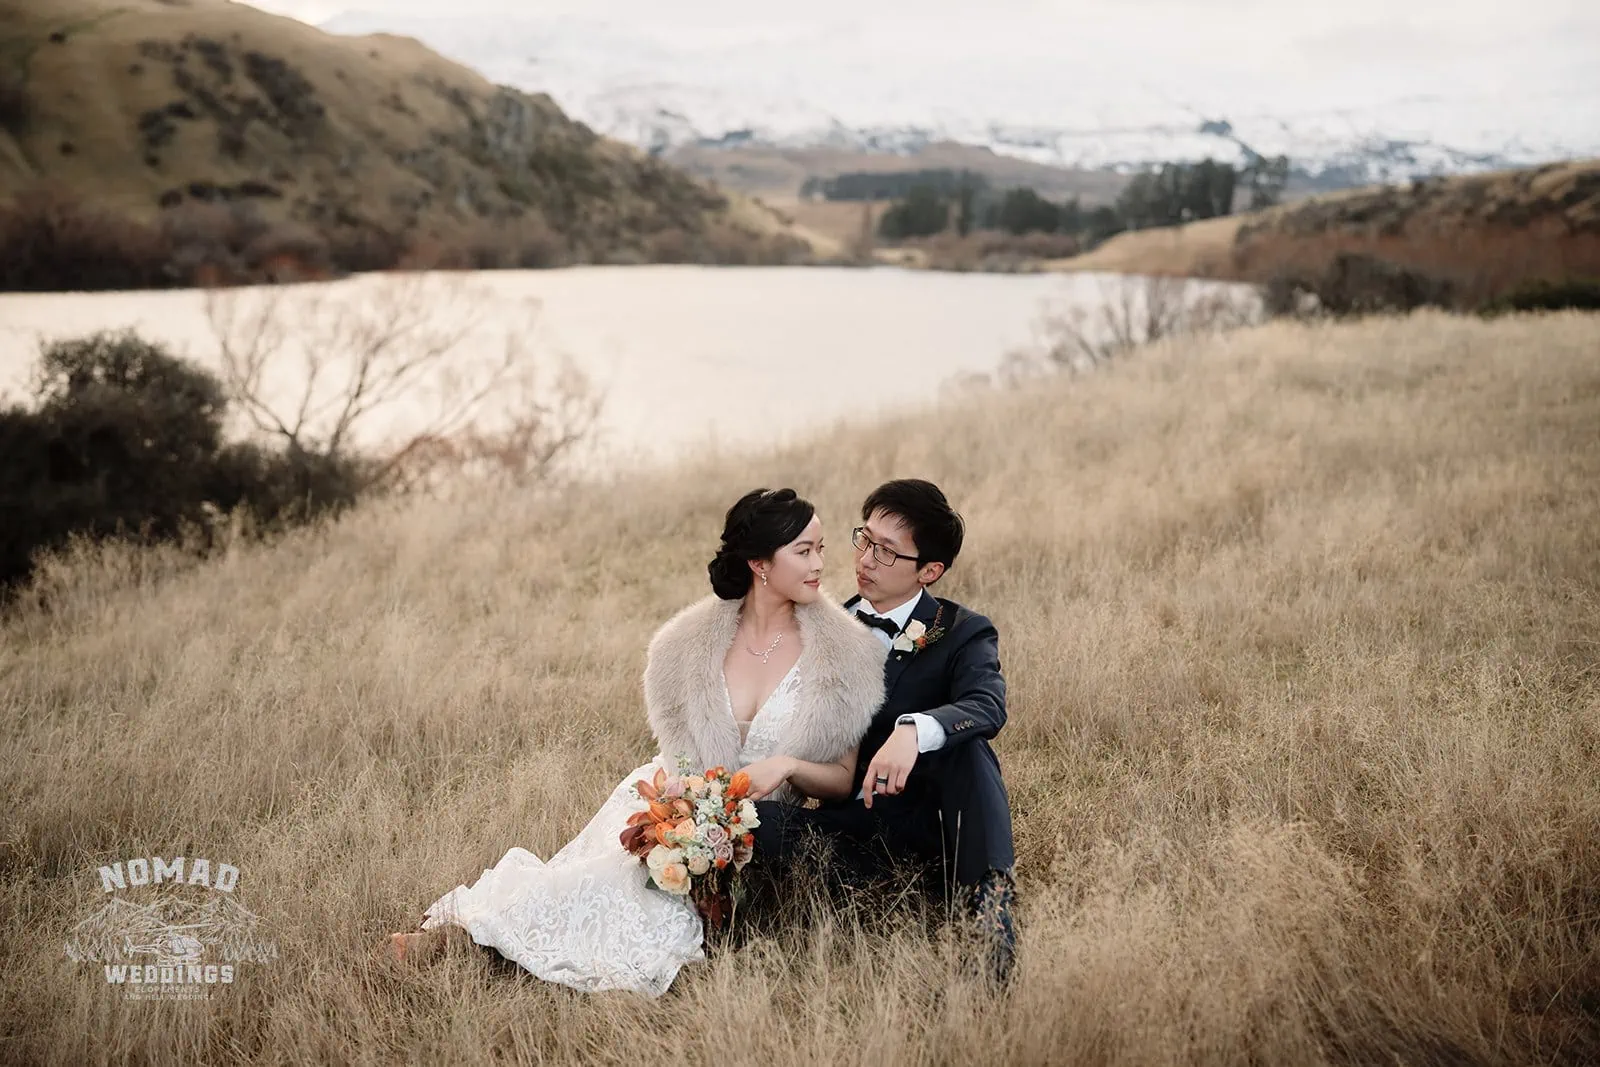 Joanna and Tony's Pre-wedding Shoot in Queenstown, New Zealand, featuring a bride and groom sitting in a field near a lake.